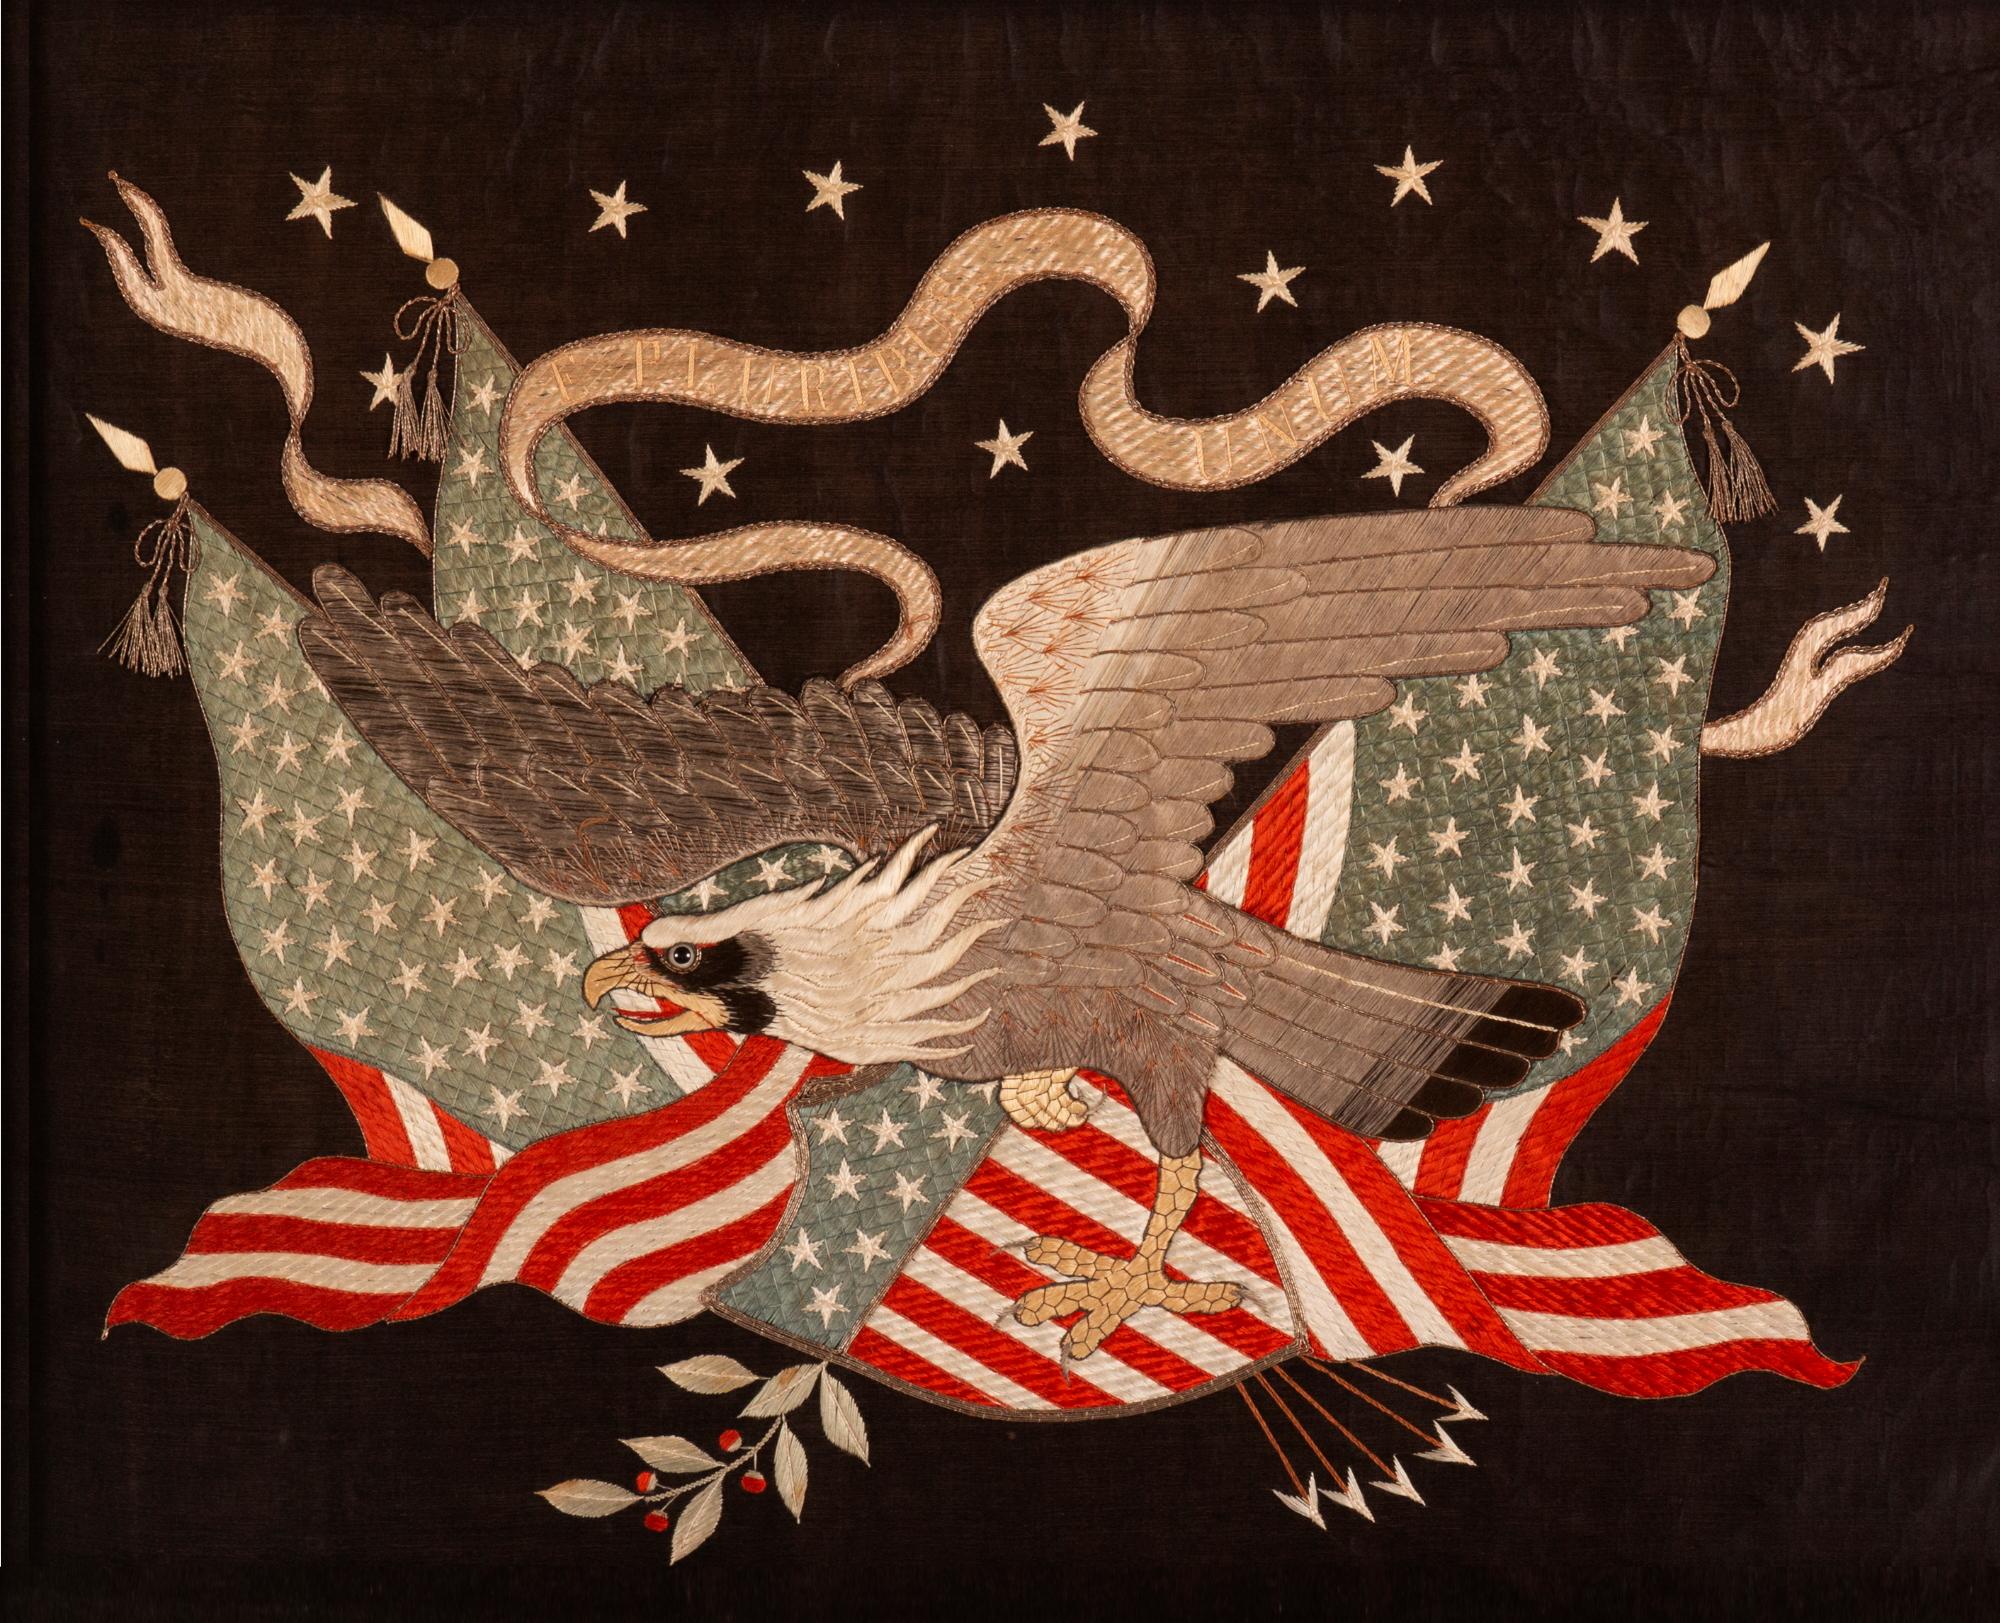 Exceptional sailor’s souvenir embroidery from the orient, with 13 stars, crossed flags, and a federal eagle, perched for flight, on a patriotic shield; significantly larger and more beautiful than what is typically encountered, circa